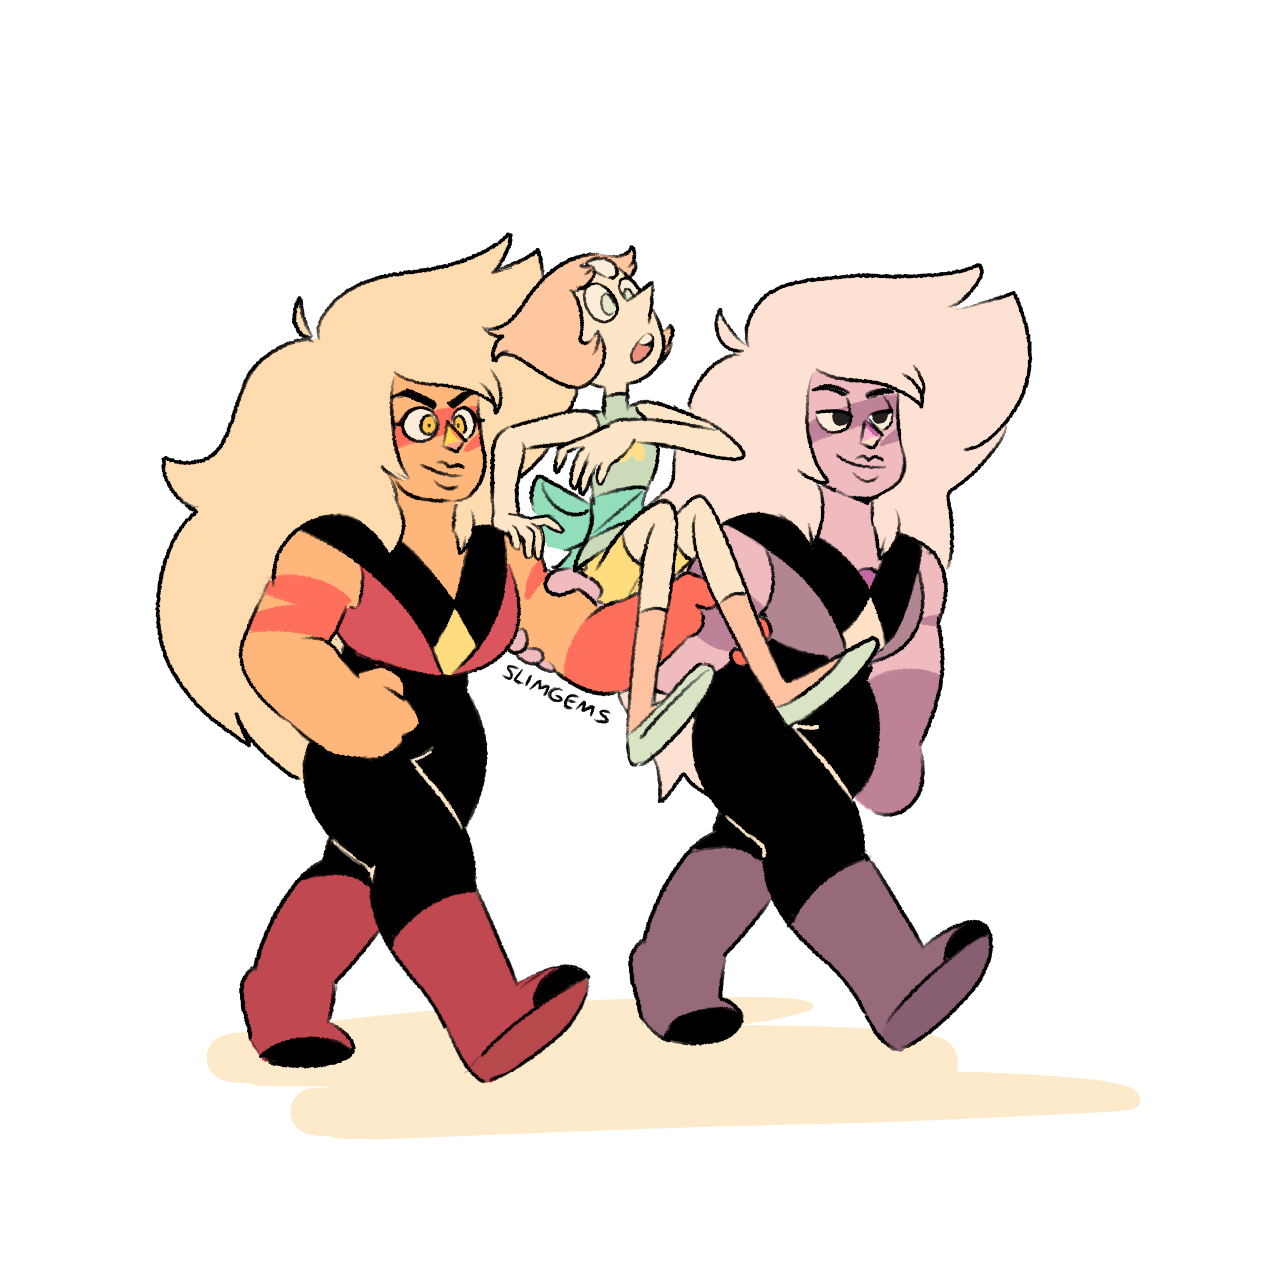 i want jasper and amethyst to come to my house like this and help me move my couch